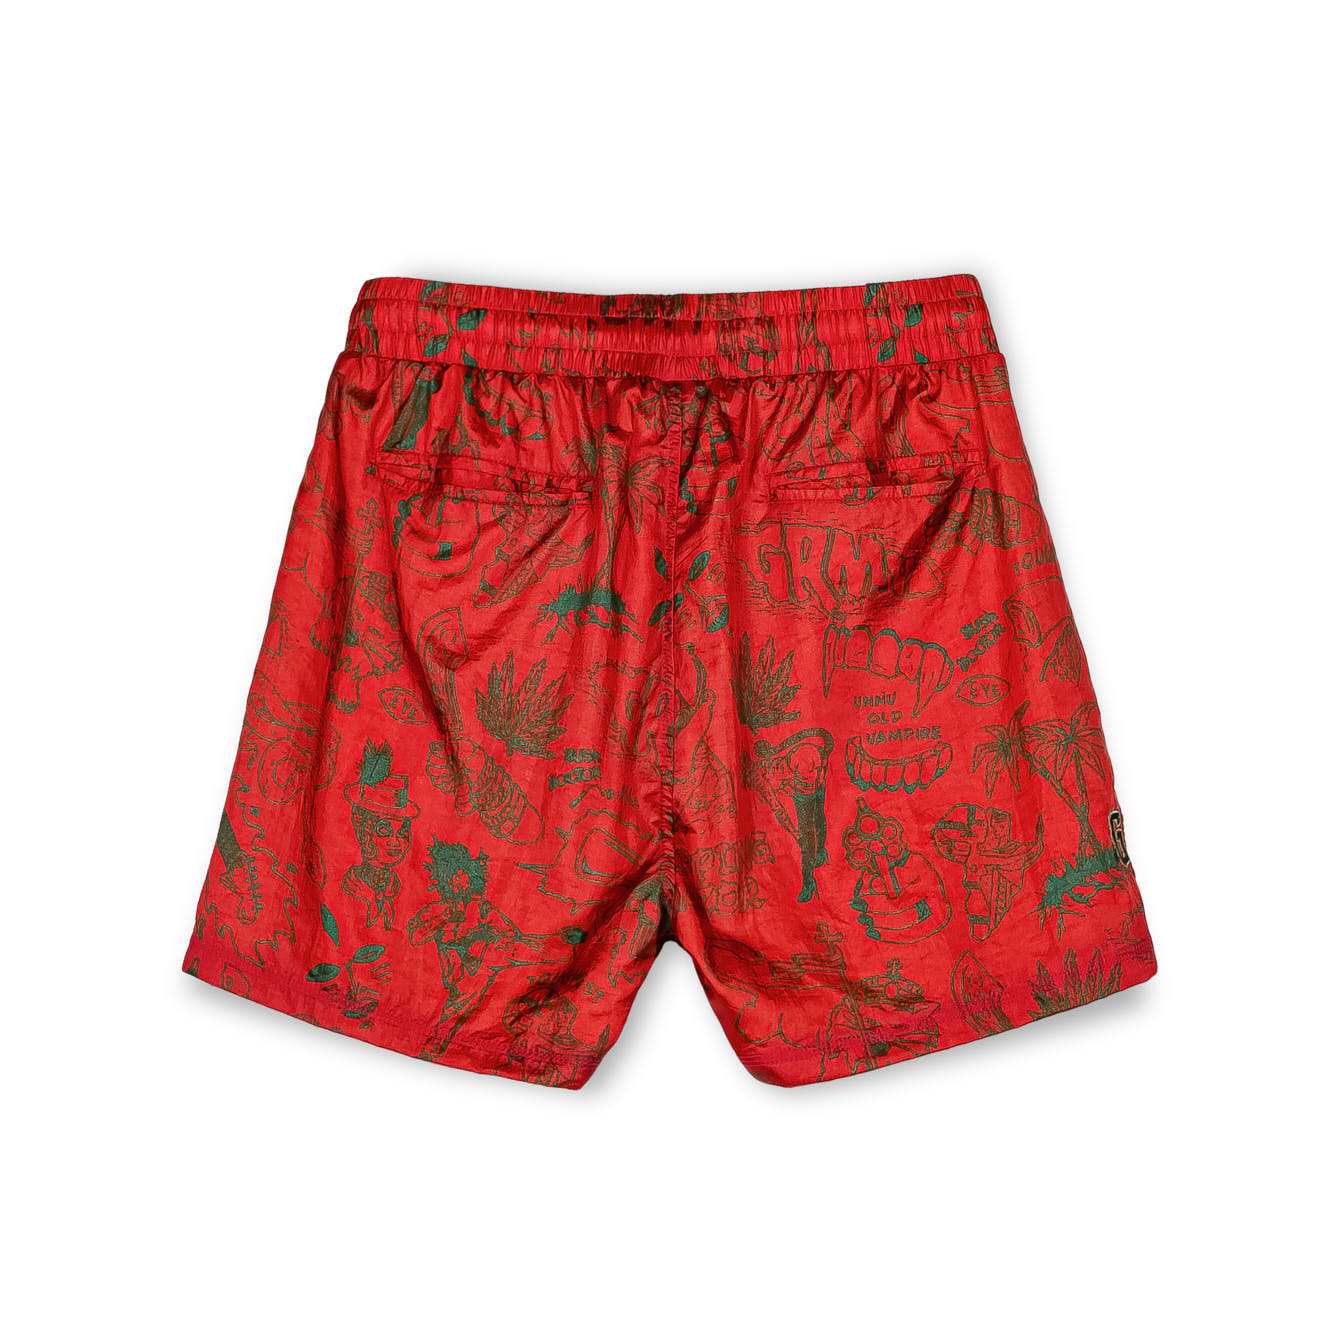 Men The Toughest Satin Shorts in Red